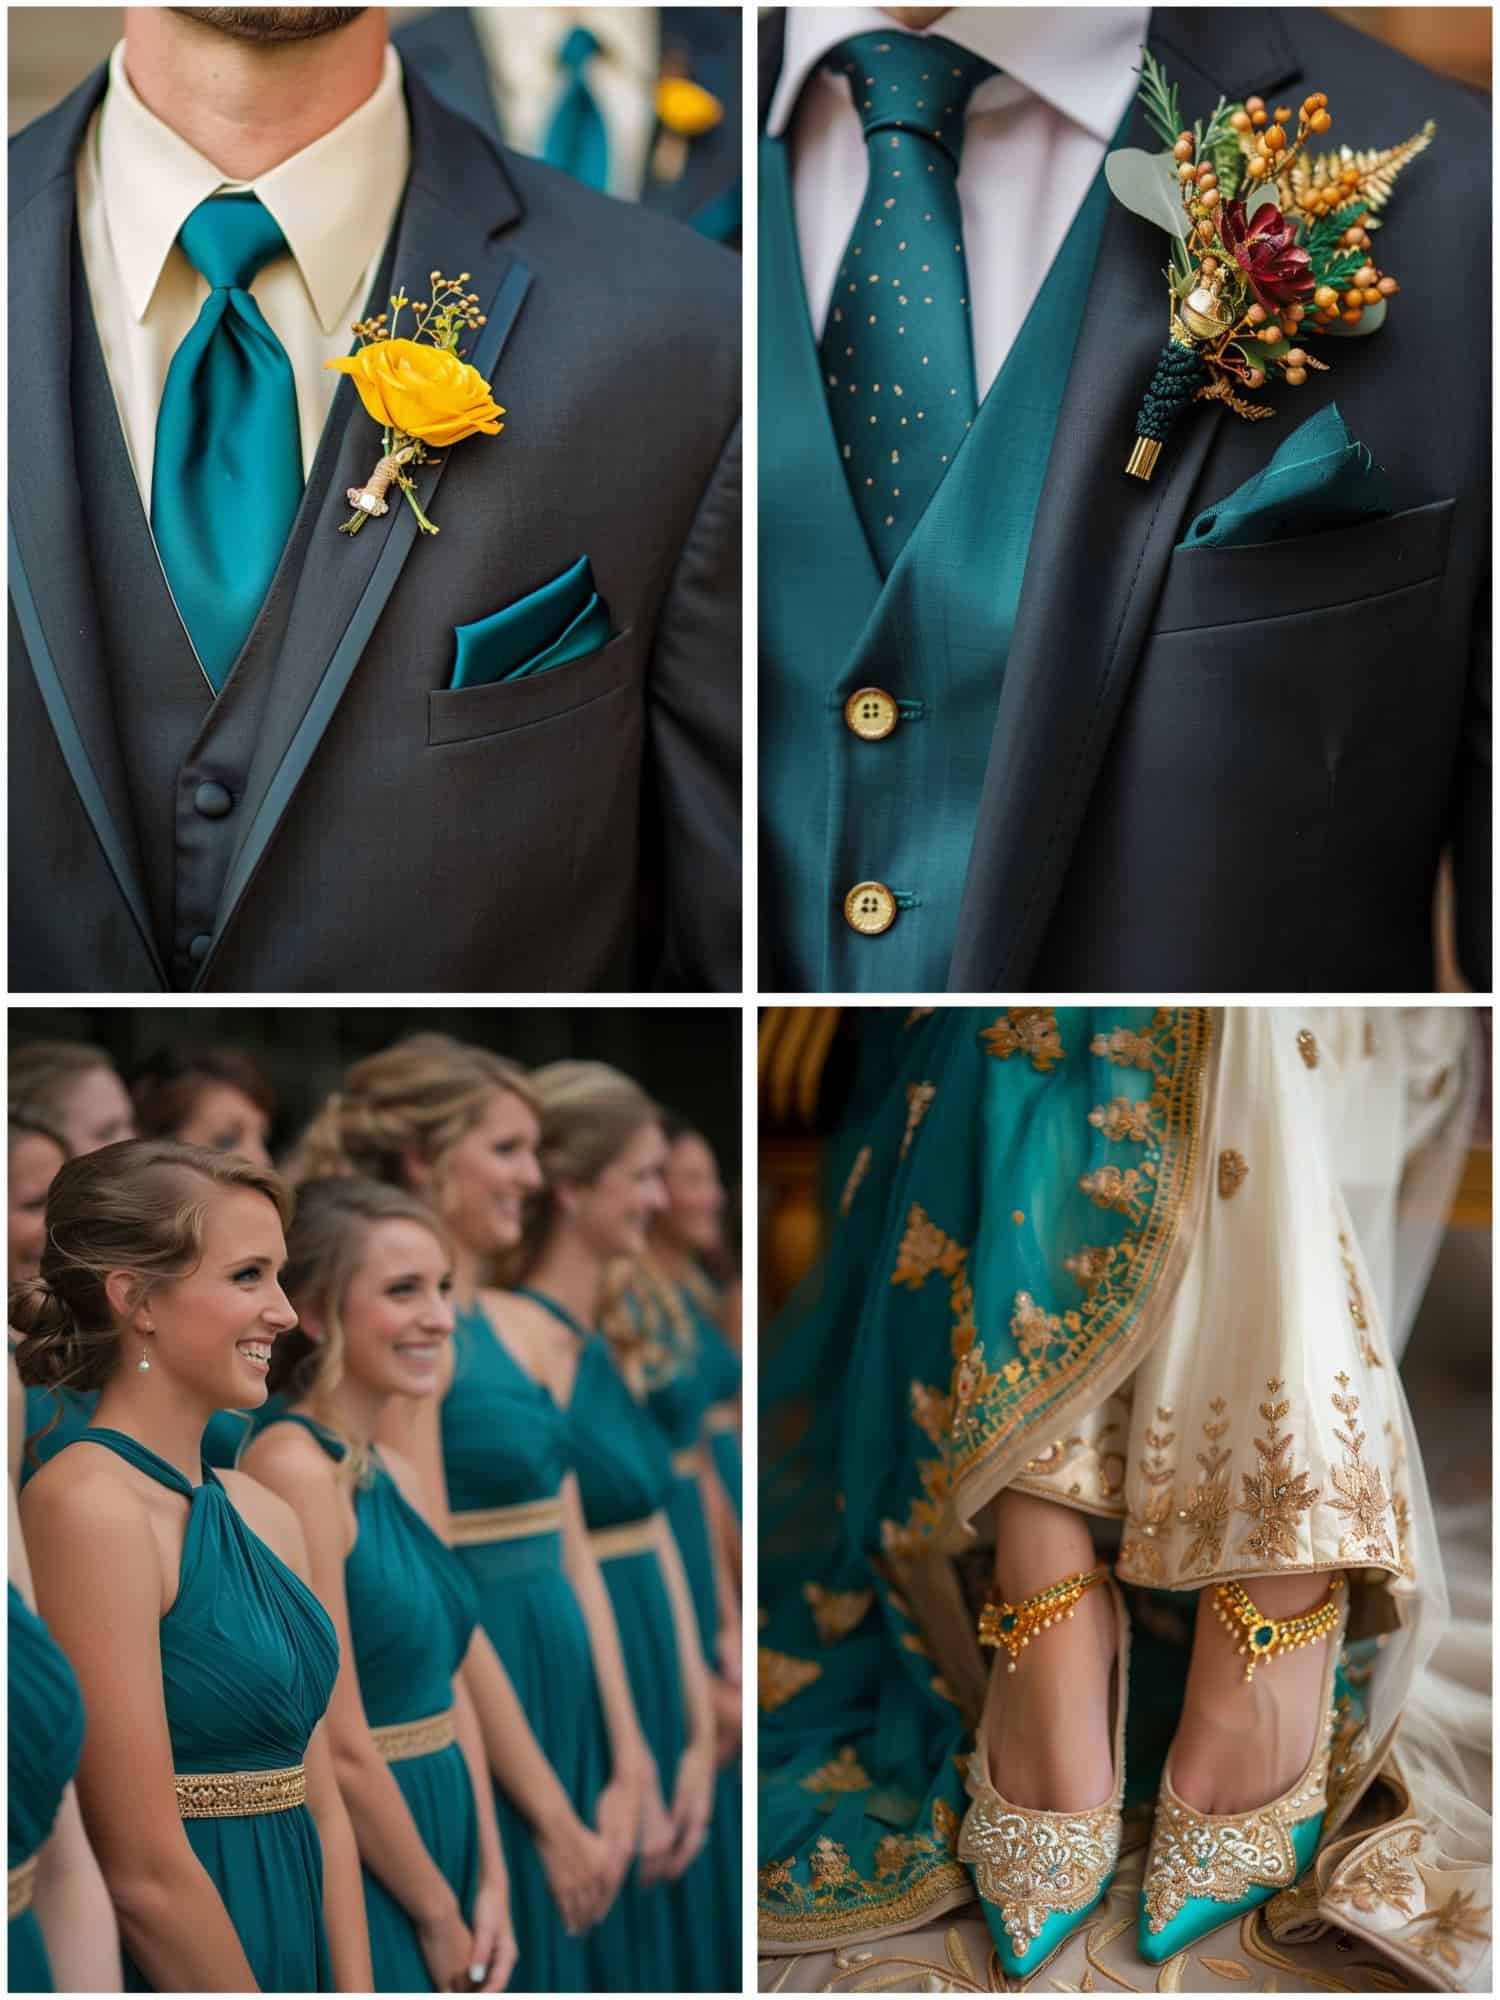 teal and gold attire for the wedding party